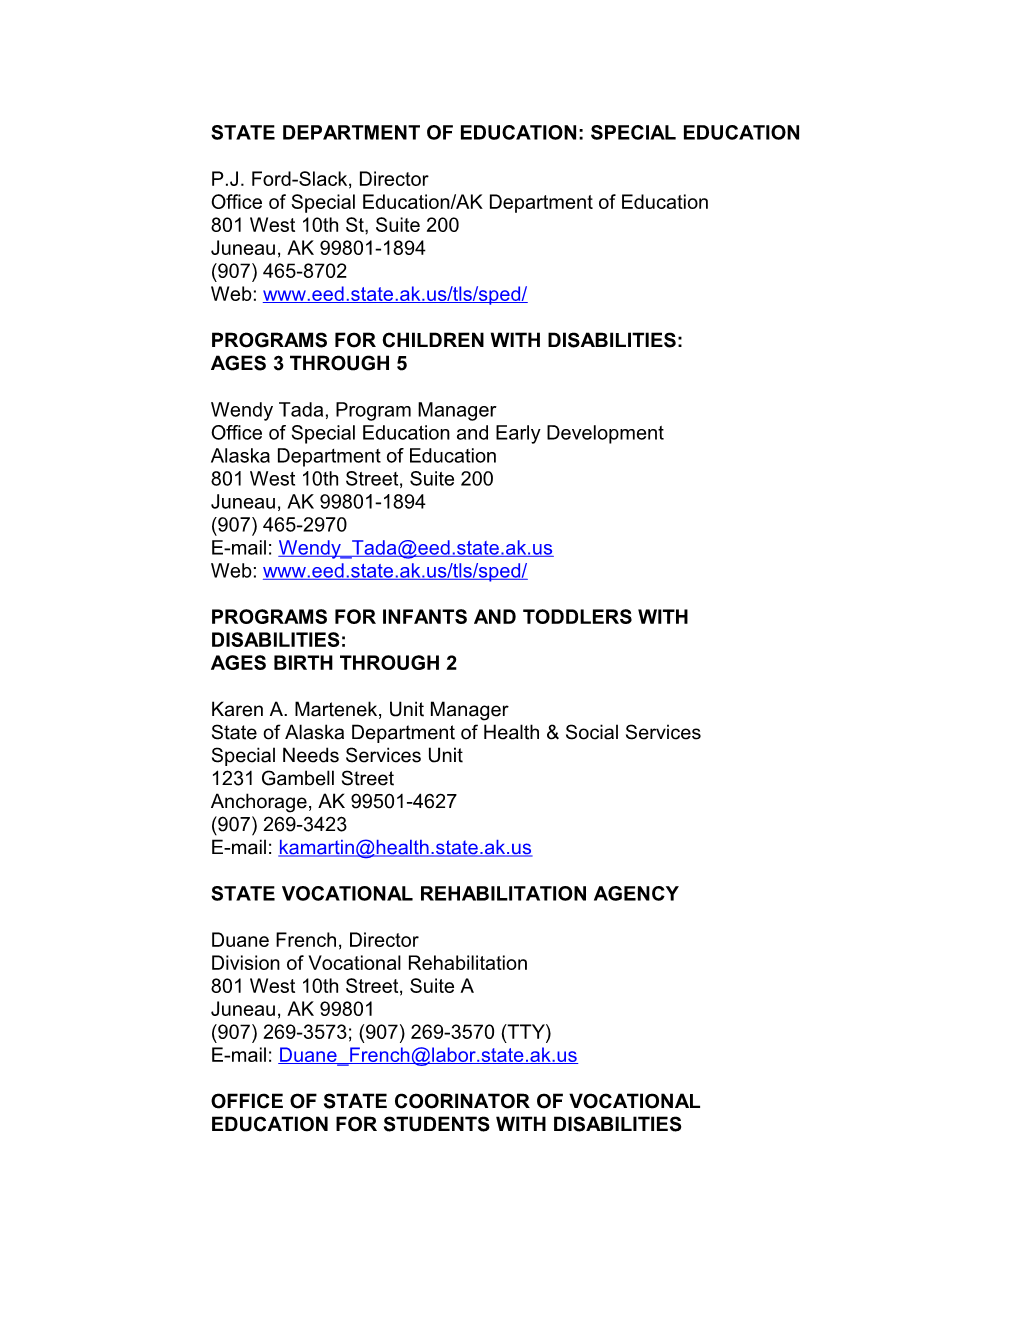 State Department of Education: Special Education s1